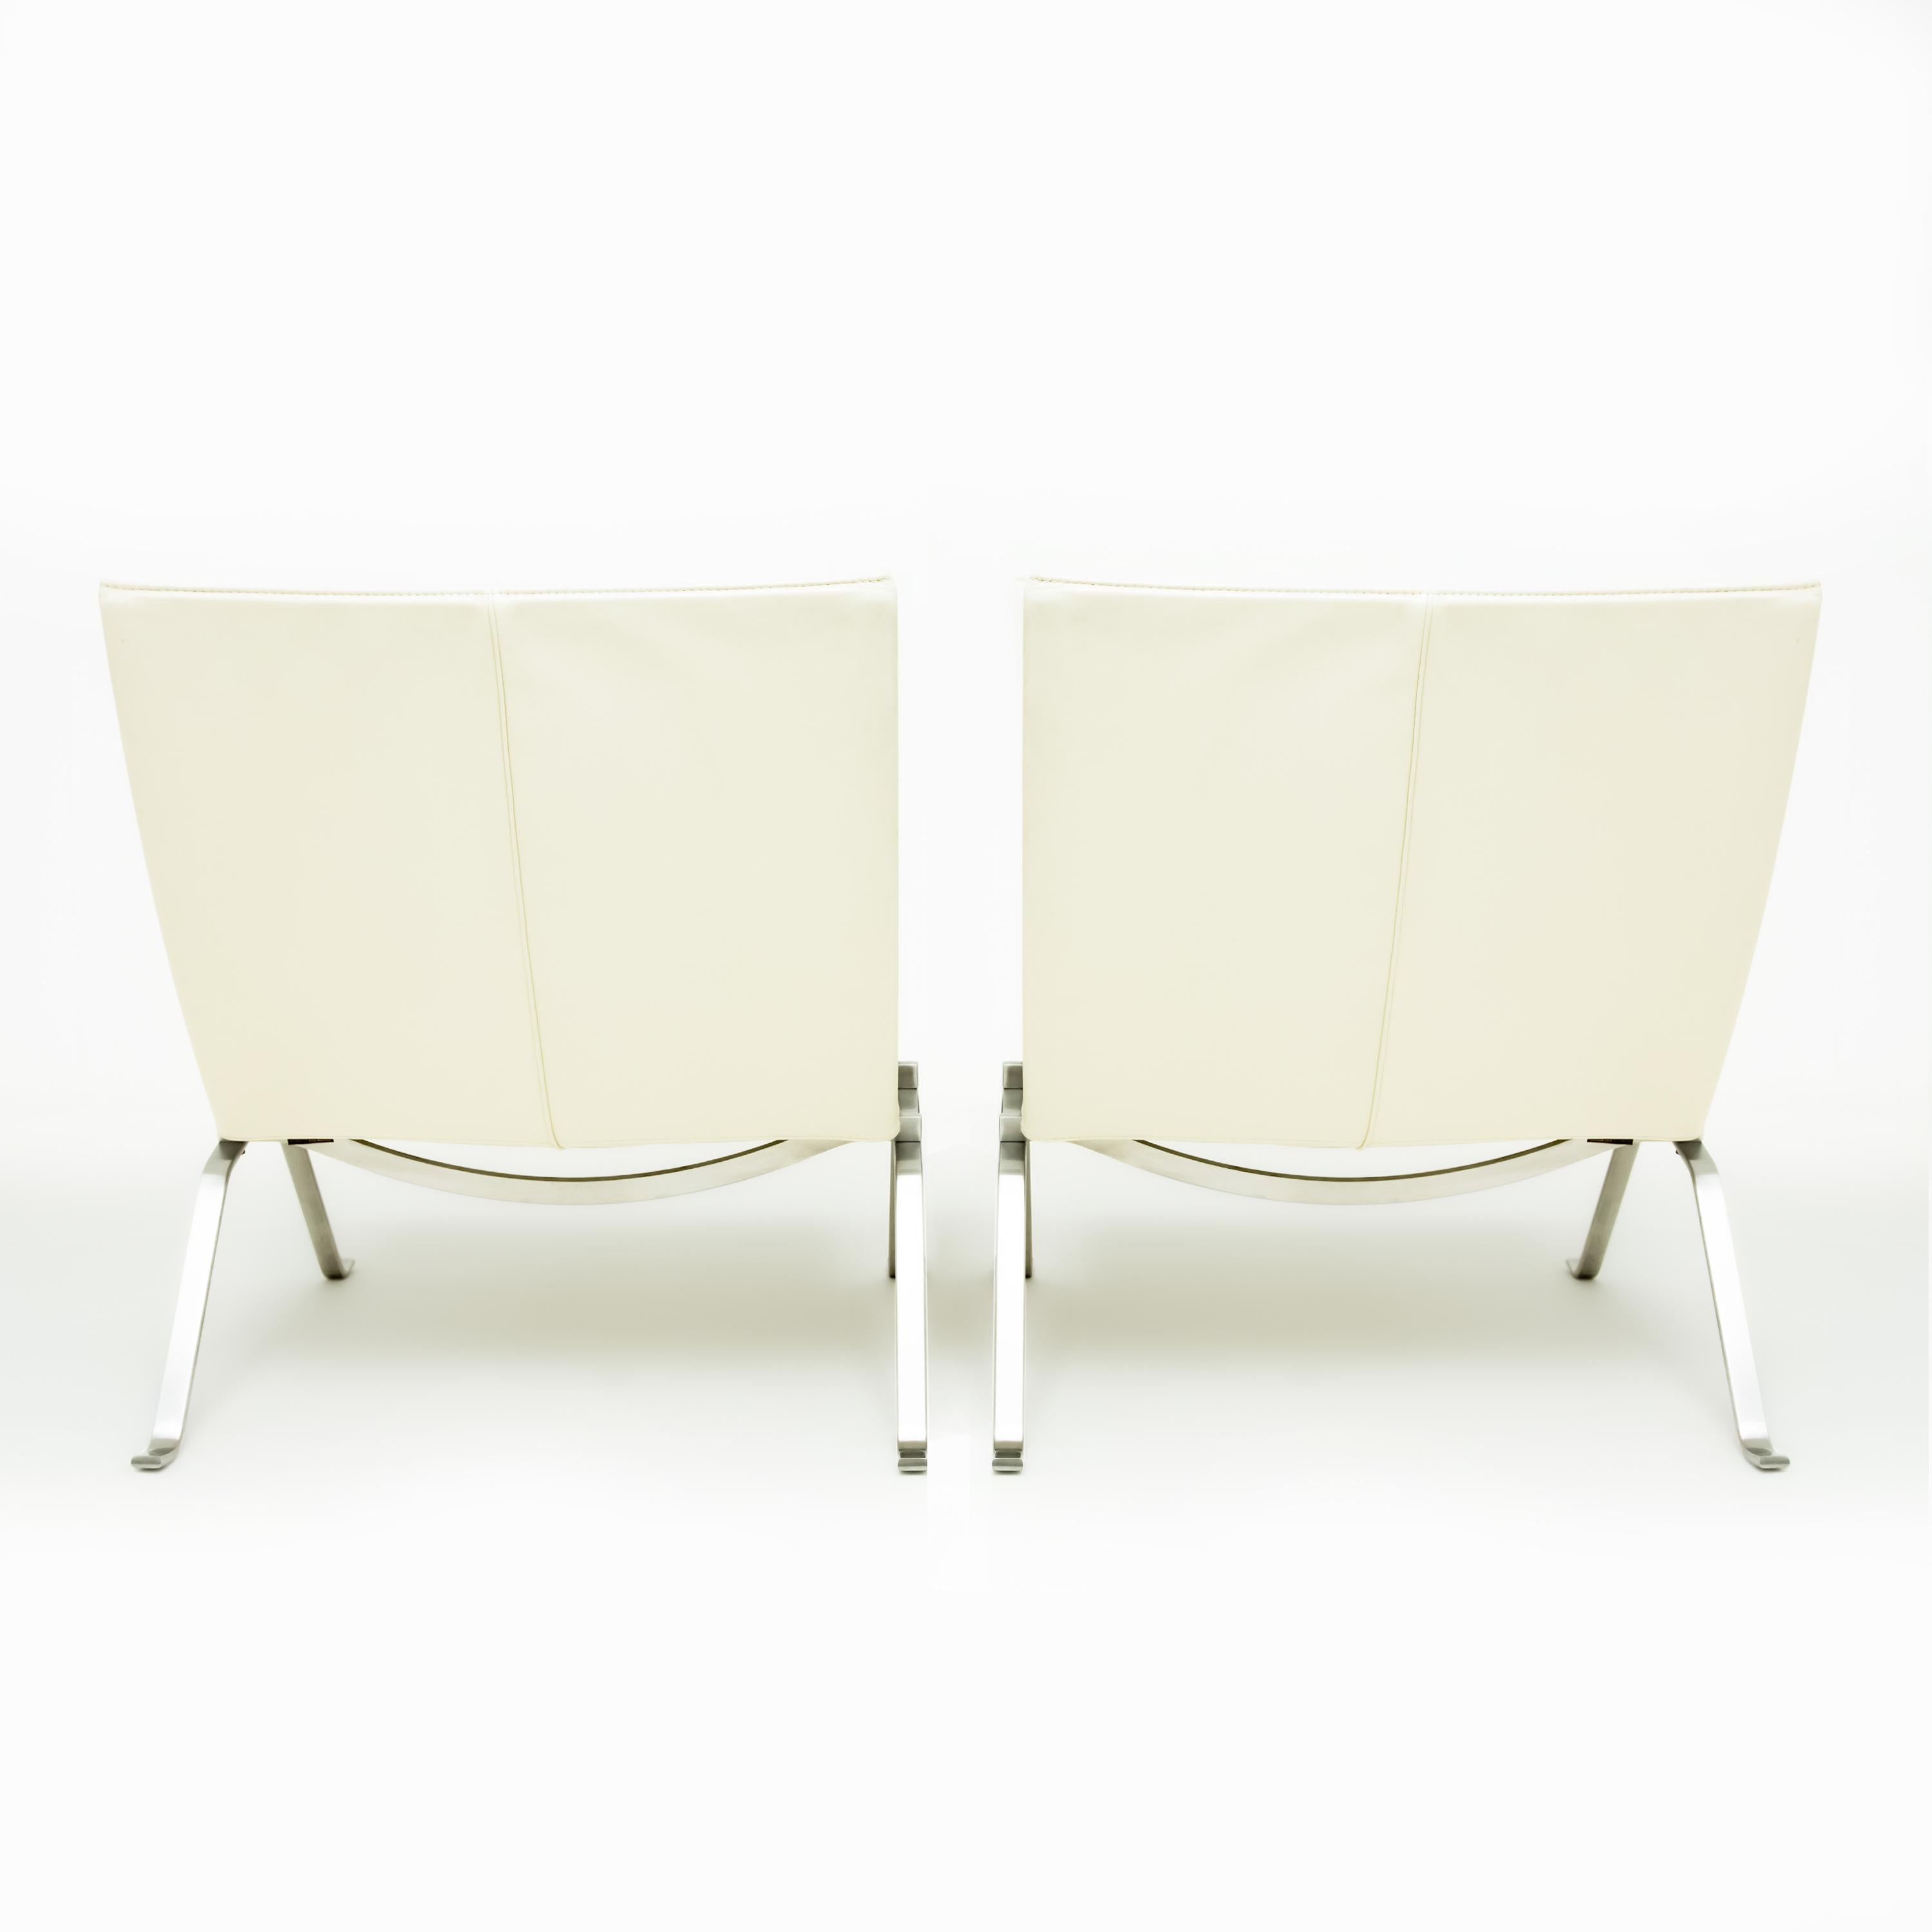 Steel Pair of Poul Kjaerholm PK22 Lounge Chairs in Cream Leather for Fritz Hansen